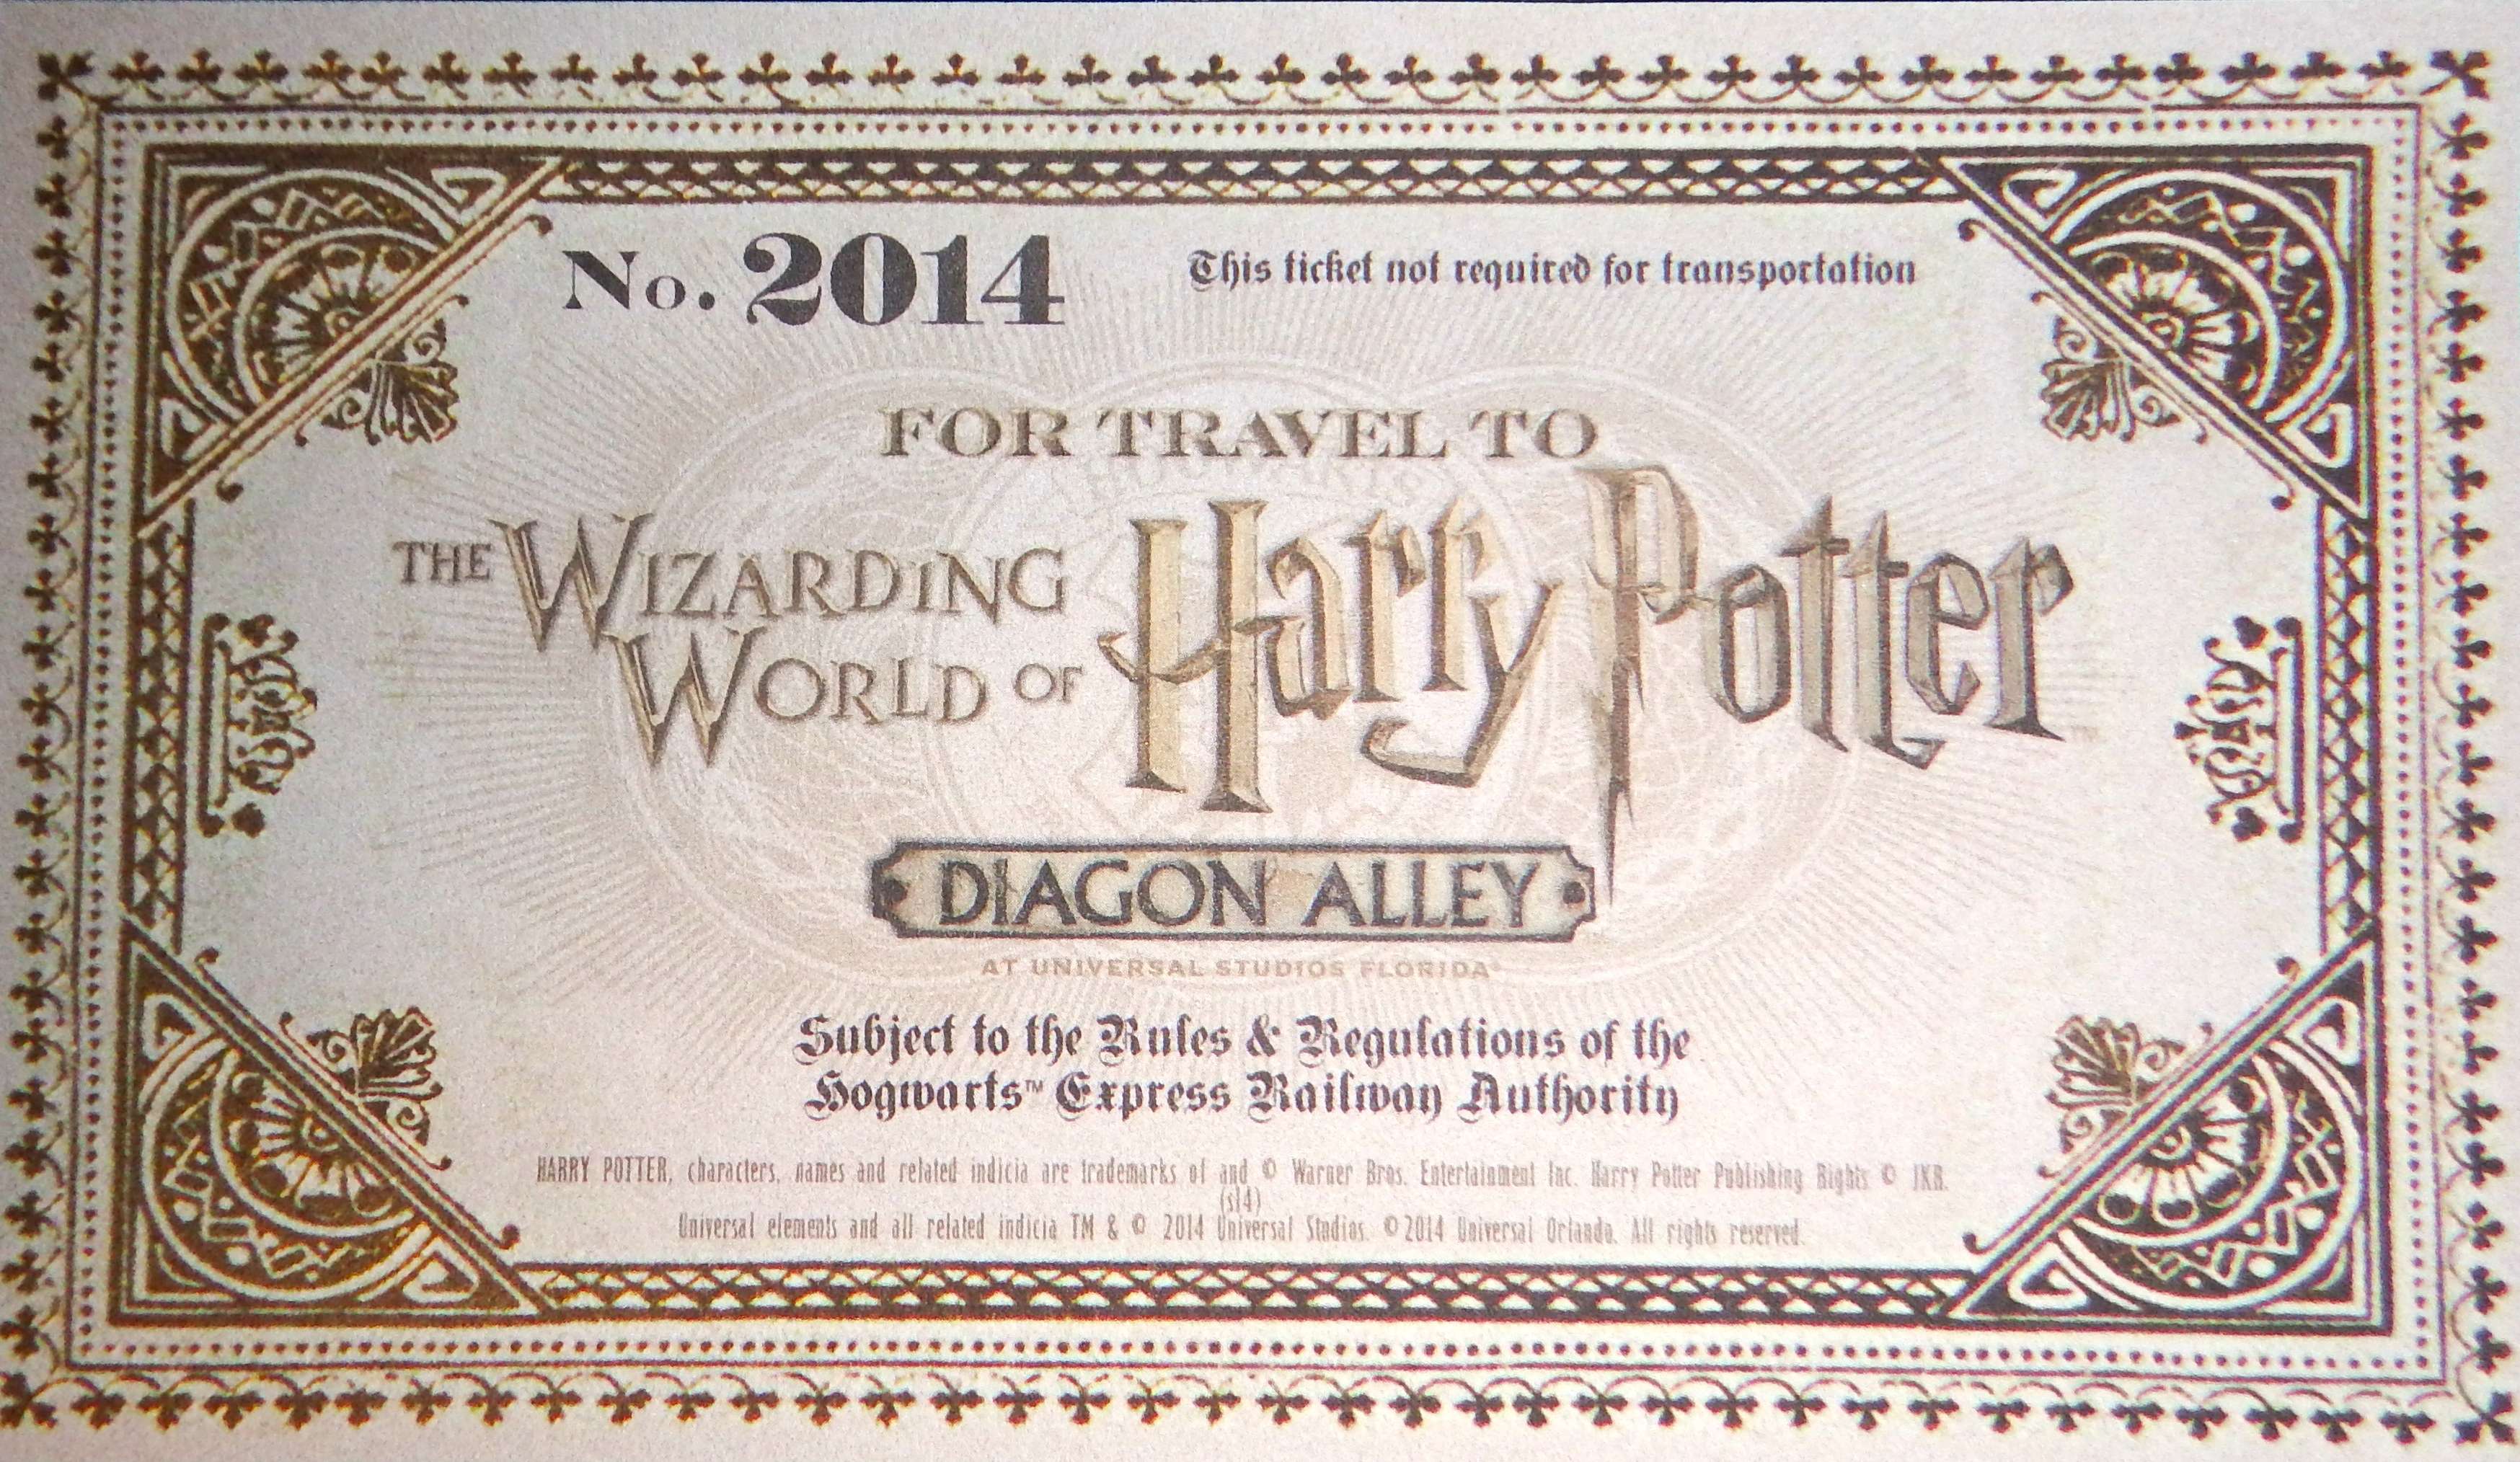 Diagon Alley Invite Unboxing For Wizarding World Of Harry Potter Preview At Universal Orlando Resort